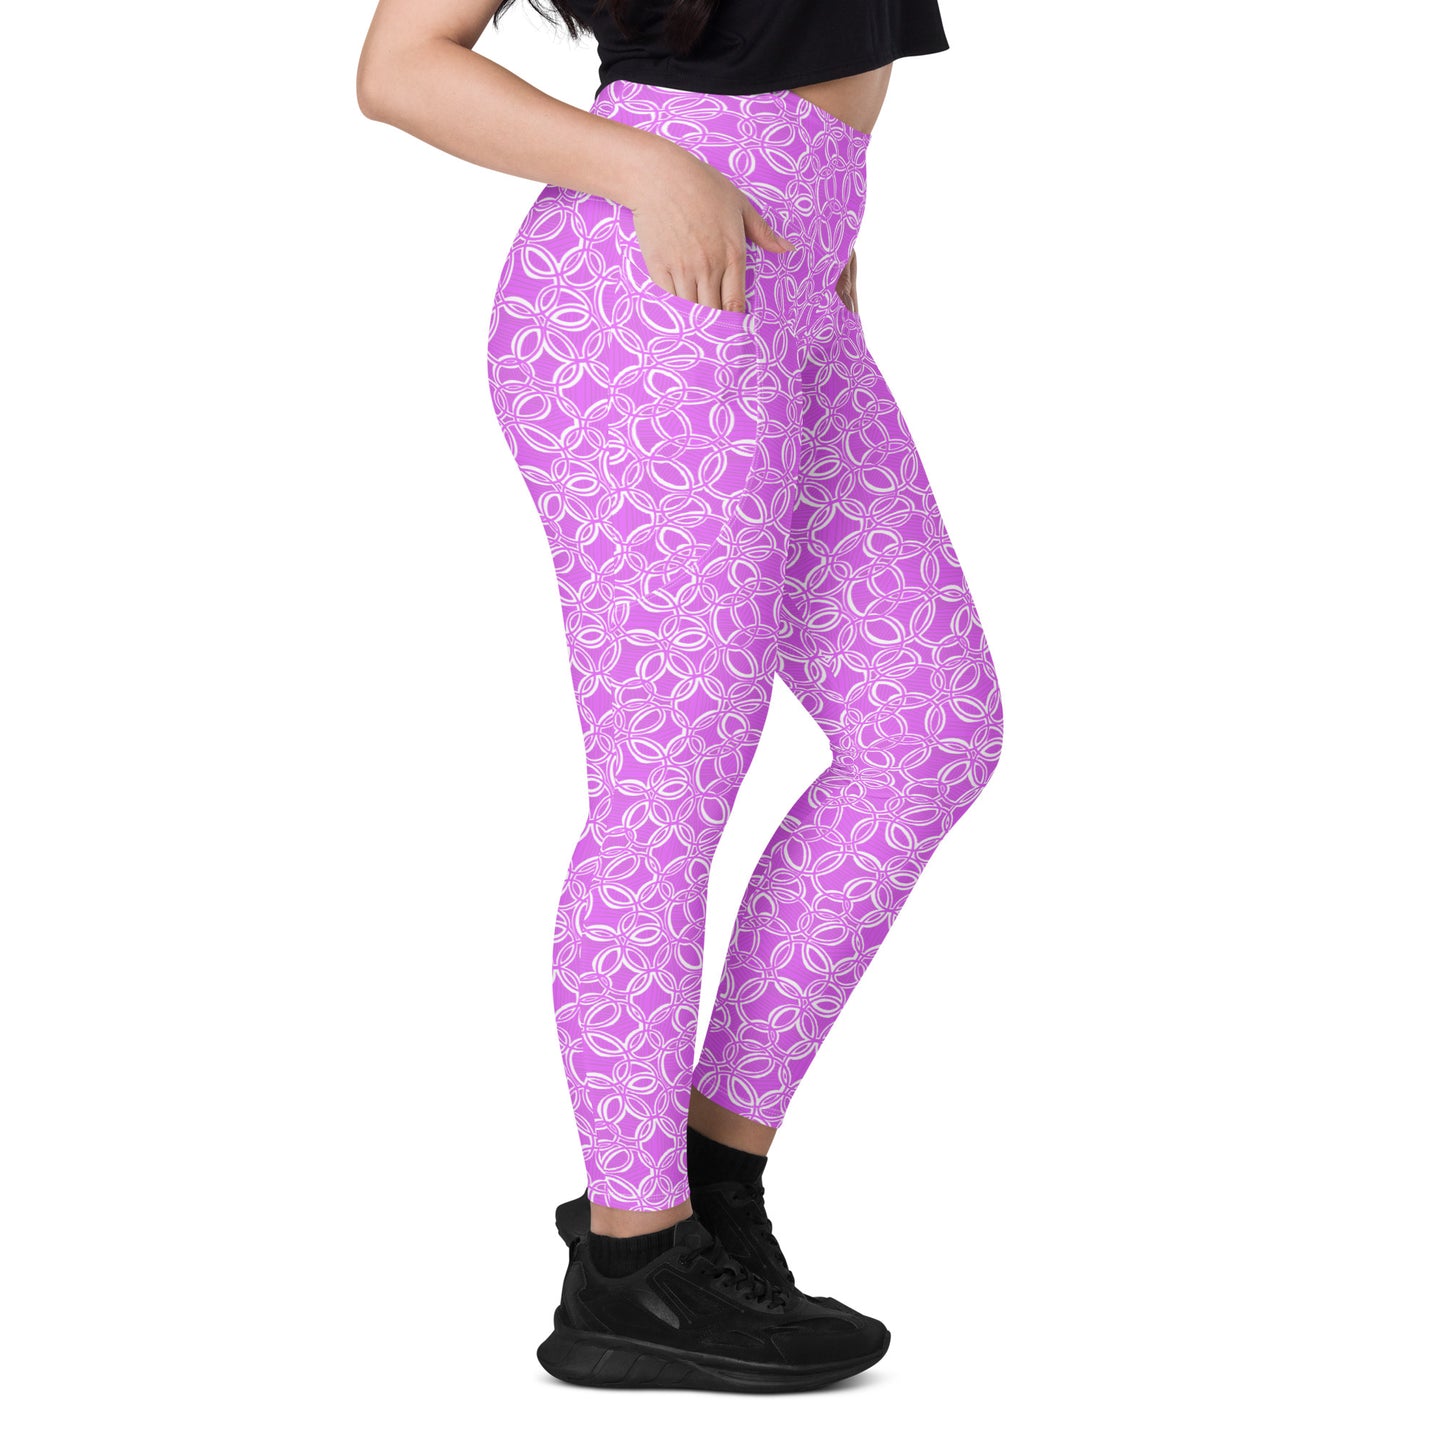 Geometric Pink Leggings with pockets. Design hand-painted by the Designer Maria Alejandra Echenique